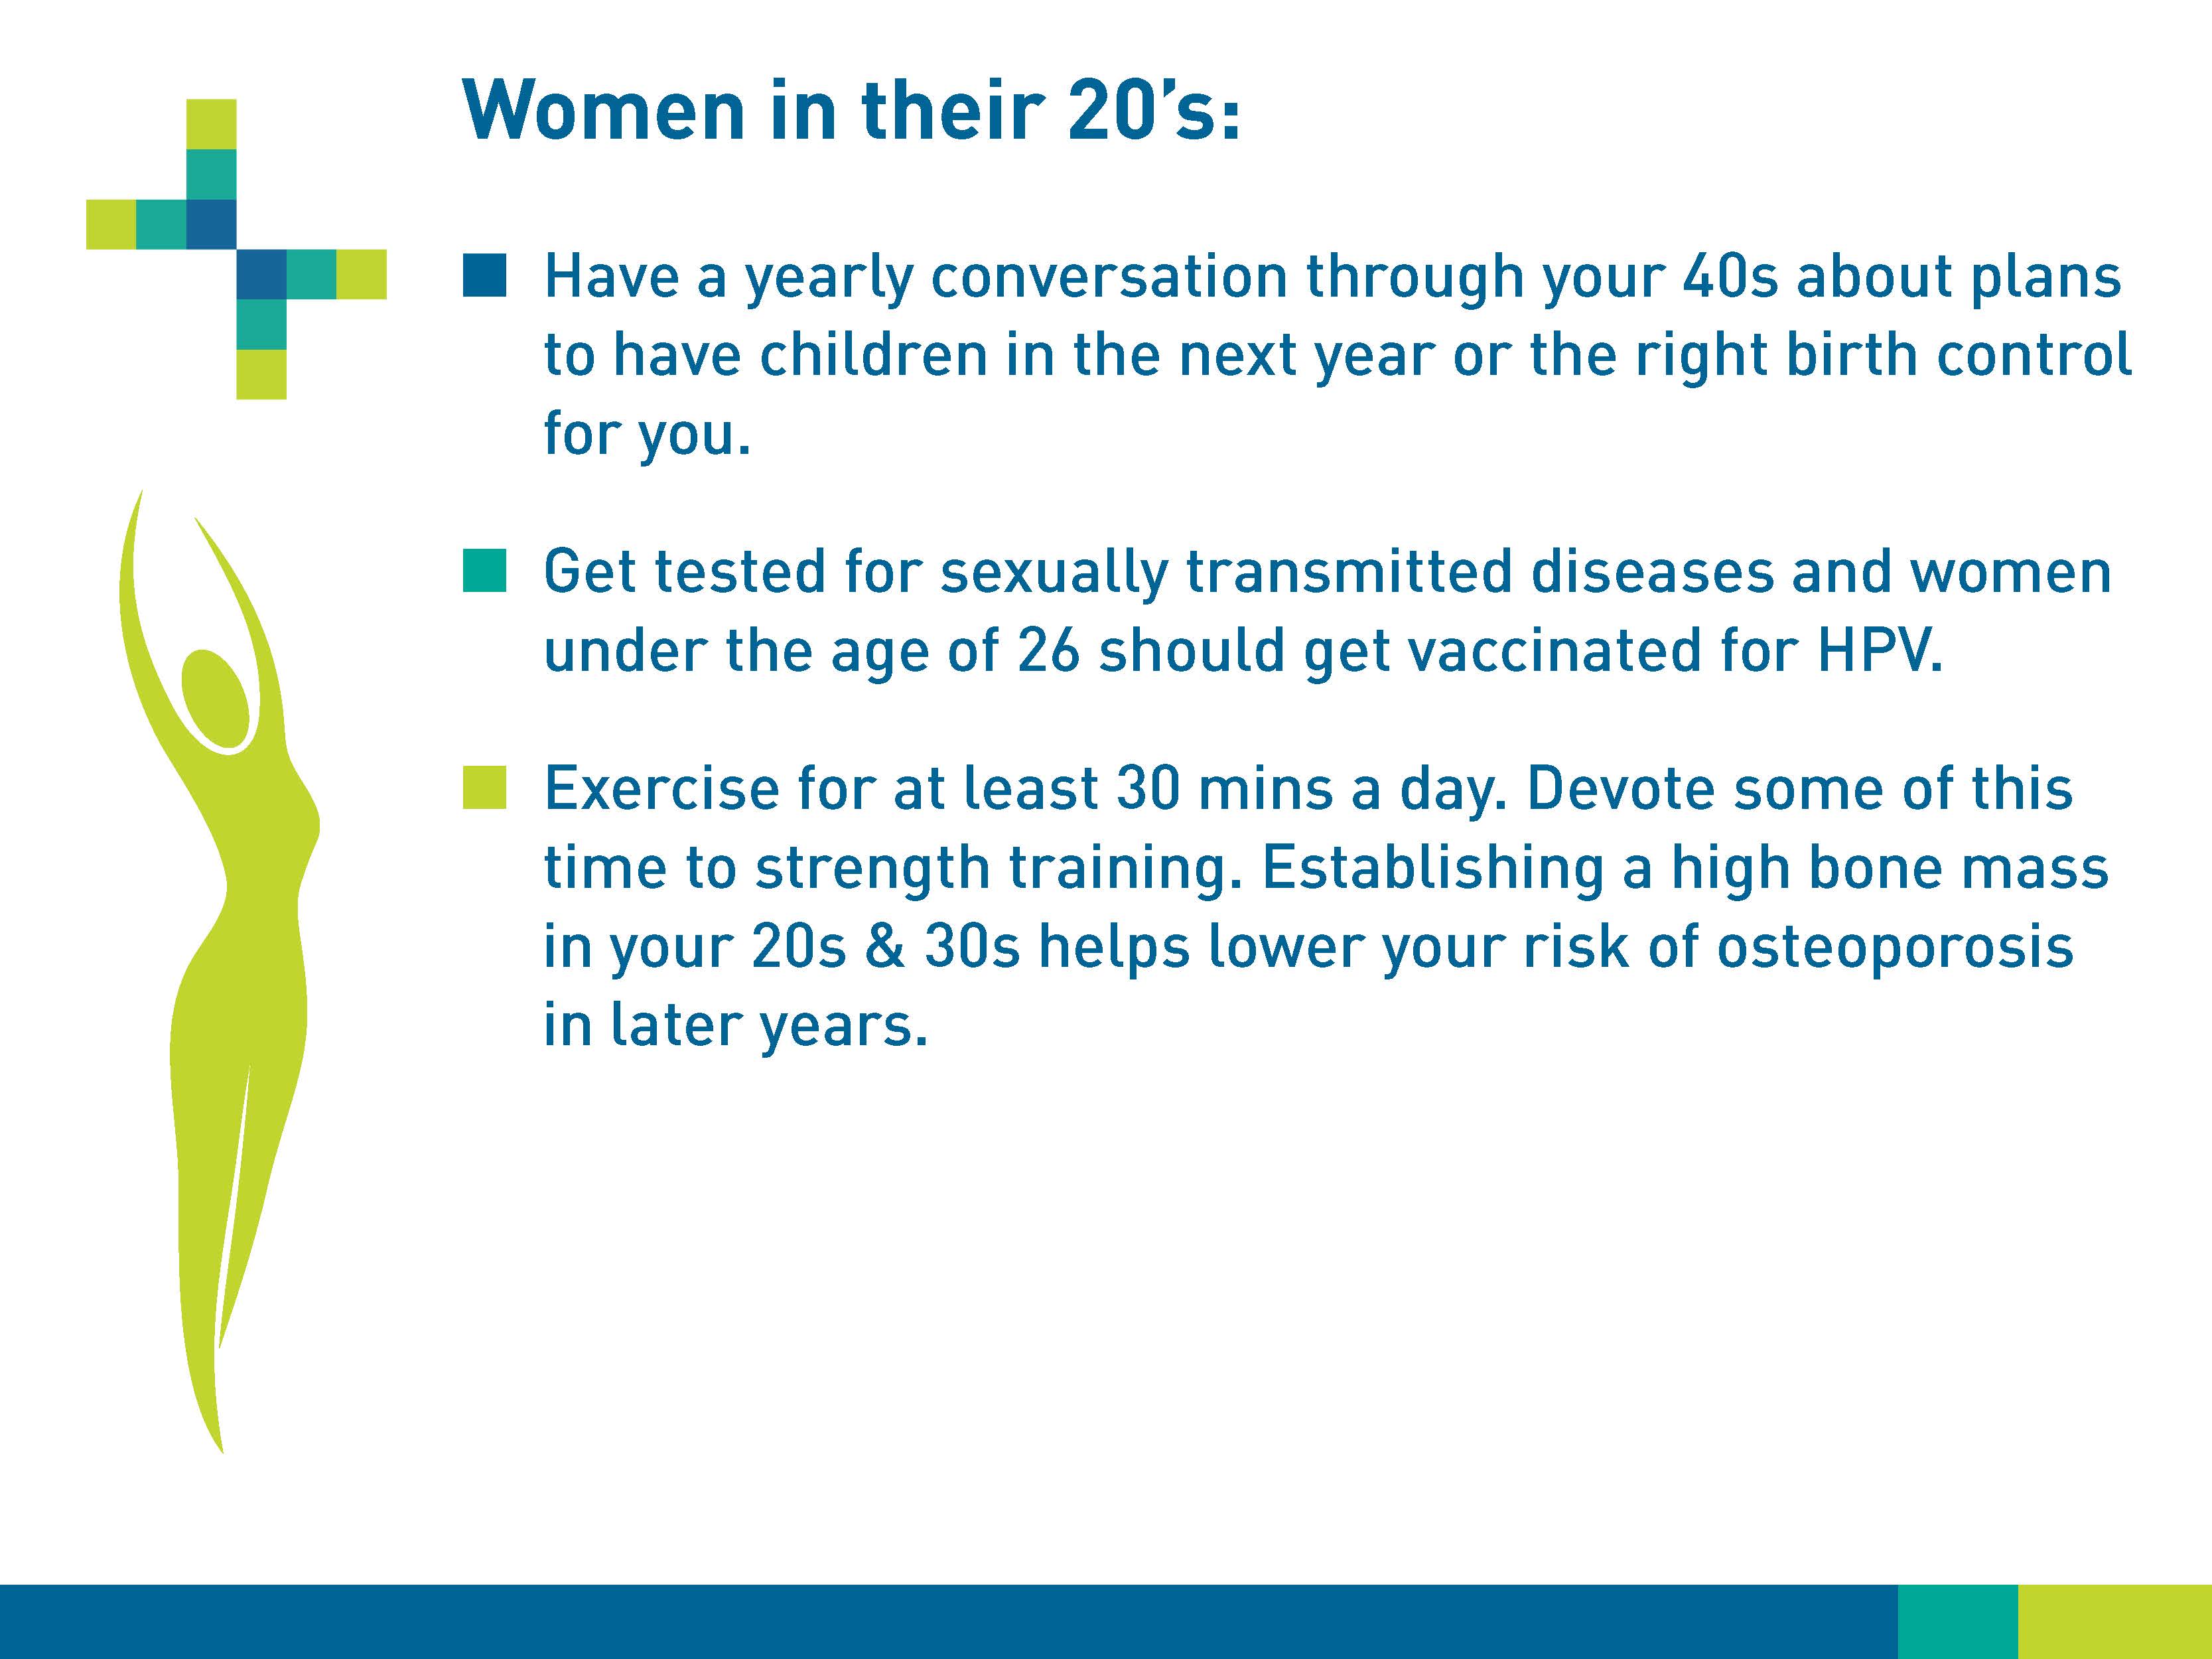 Women in their 20s: Have a yearly conversation through your 40s about plans to have children in the next year or the right birth control for you. Get tested for sexually transmitted diseases and women under the age of 26 should get vaccinated for HPV. Exercise for at least 30 minutes a day. Devote some of this time to strength training. Establishing a high bone mass in your 20s and 30s helps lower your risk of osteoporosis in later years.